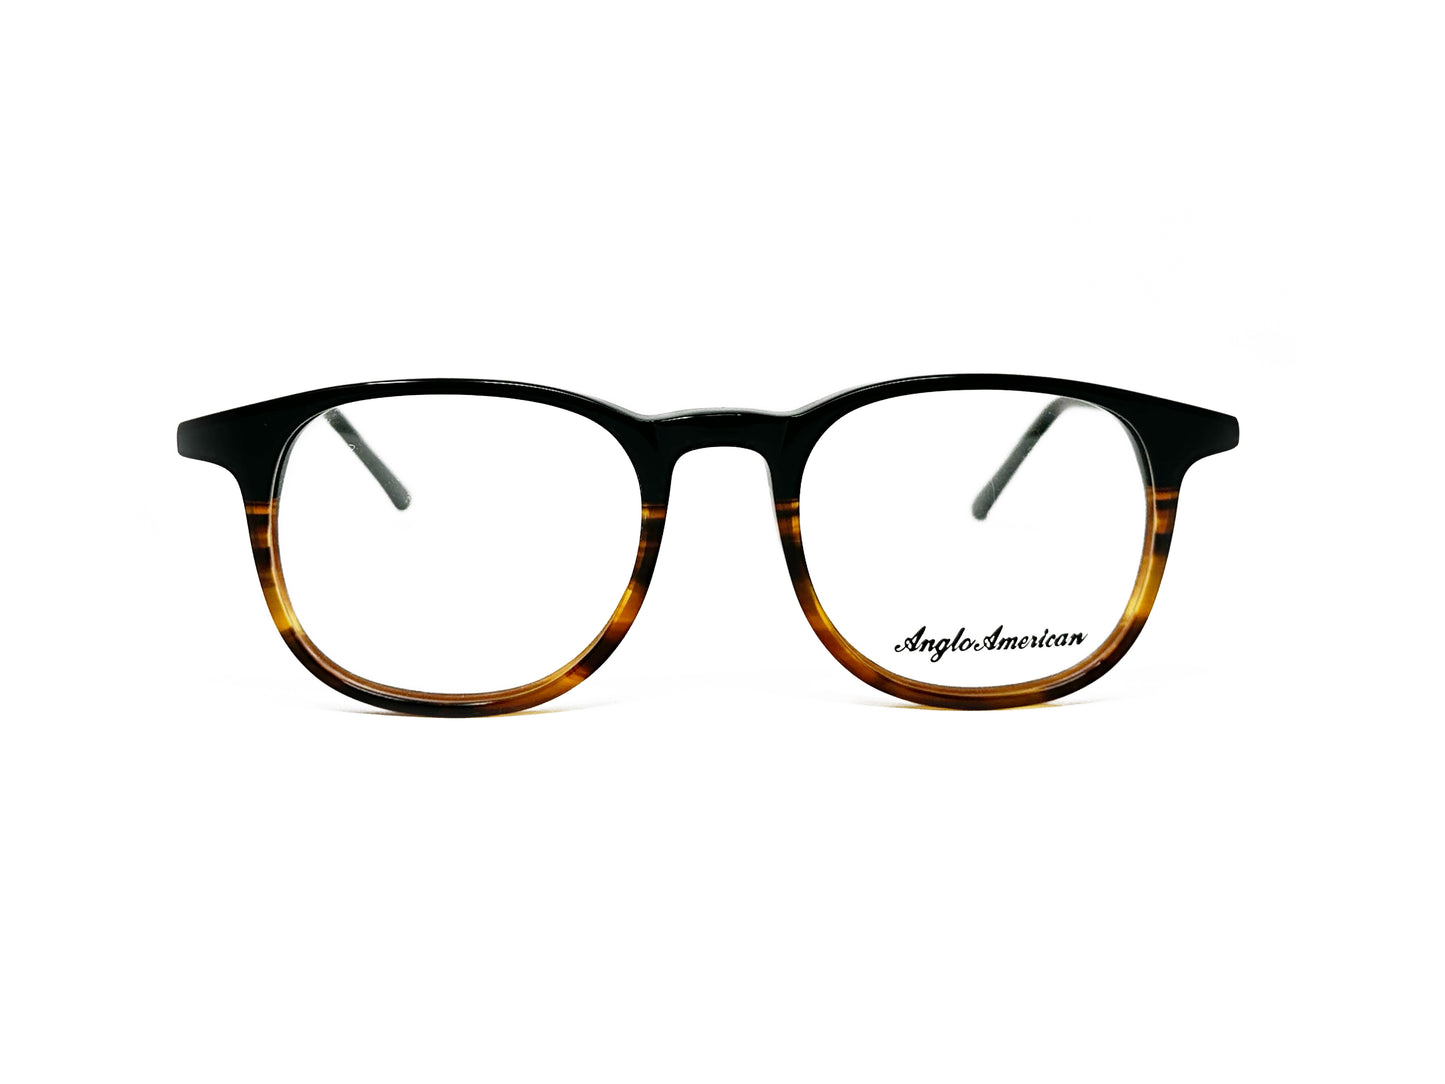 Anglo American Optical rounded-square, acetate, optical frame. Model: 402EVO. Color: BBTT - Black with tortoise-striped bottom. Front view. 